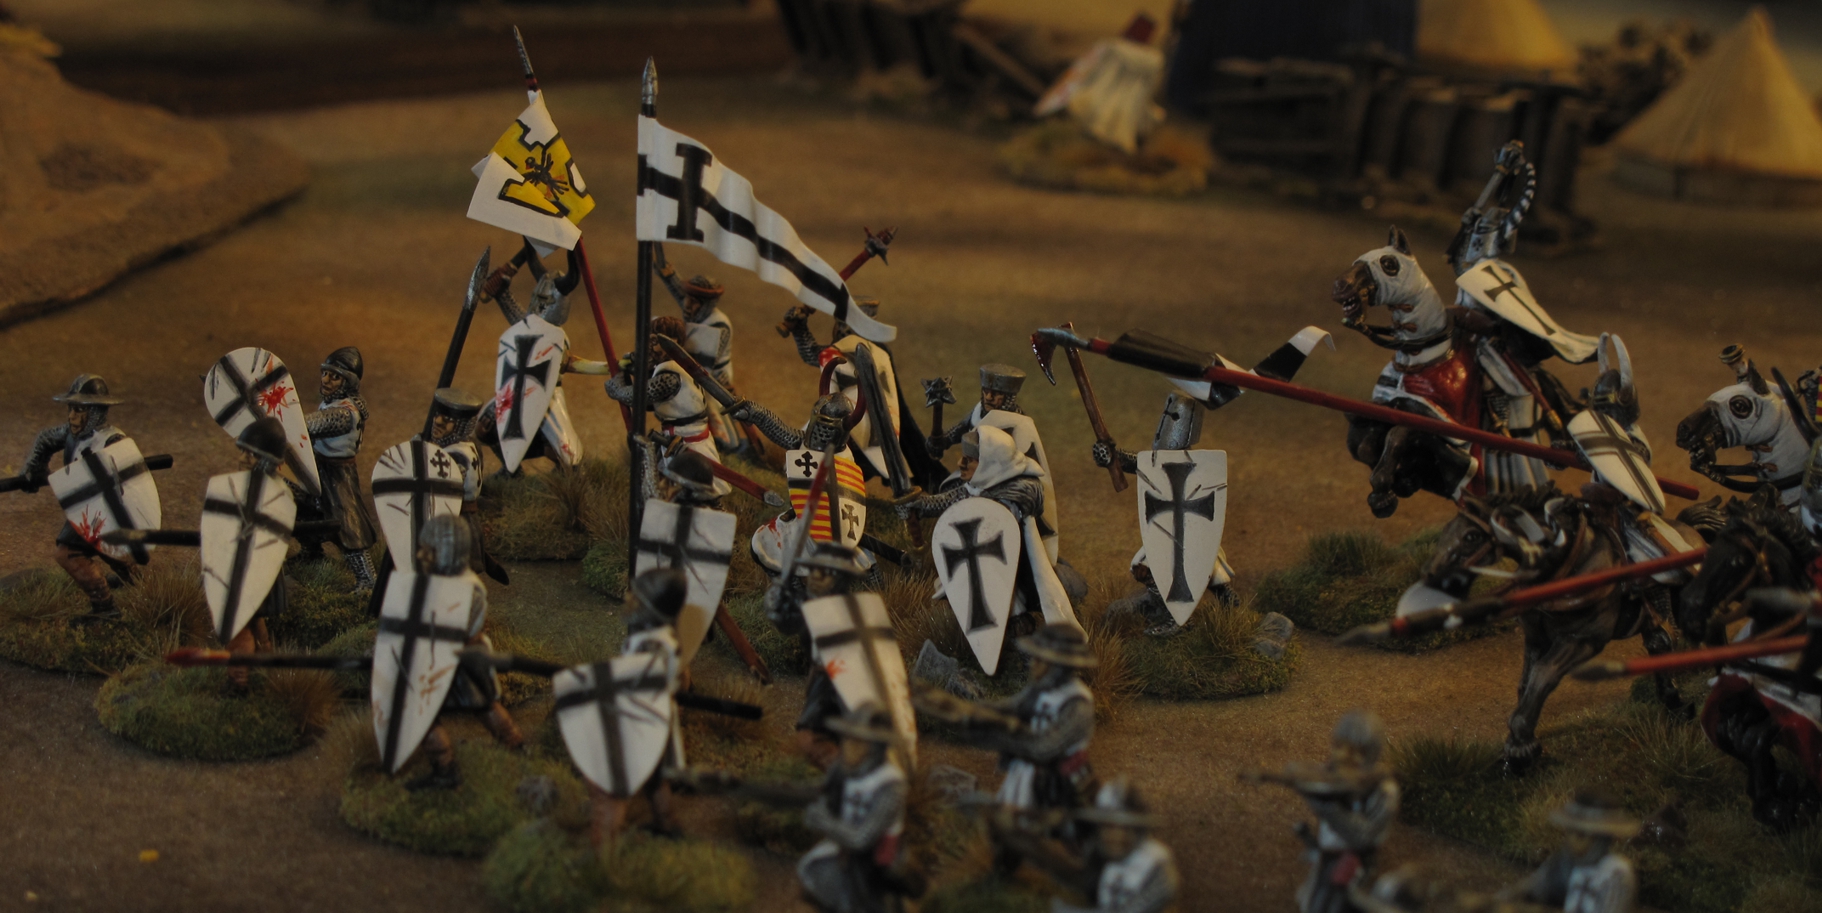 My "Teutonic Knights" are raring to go!